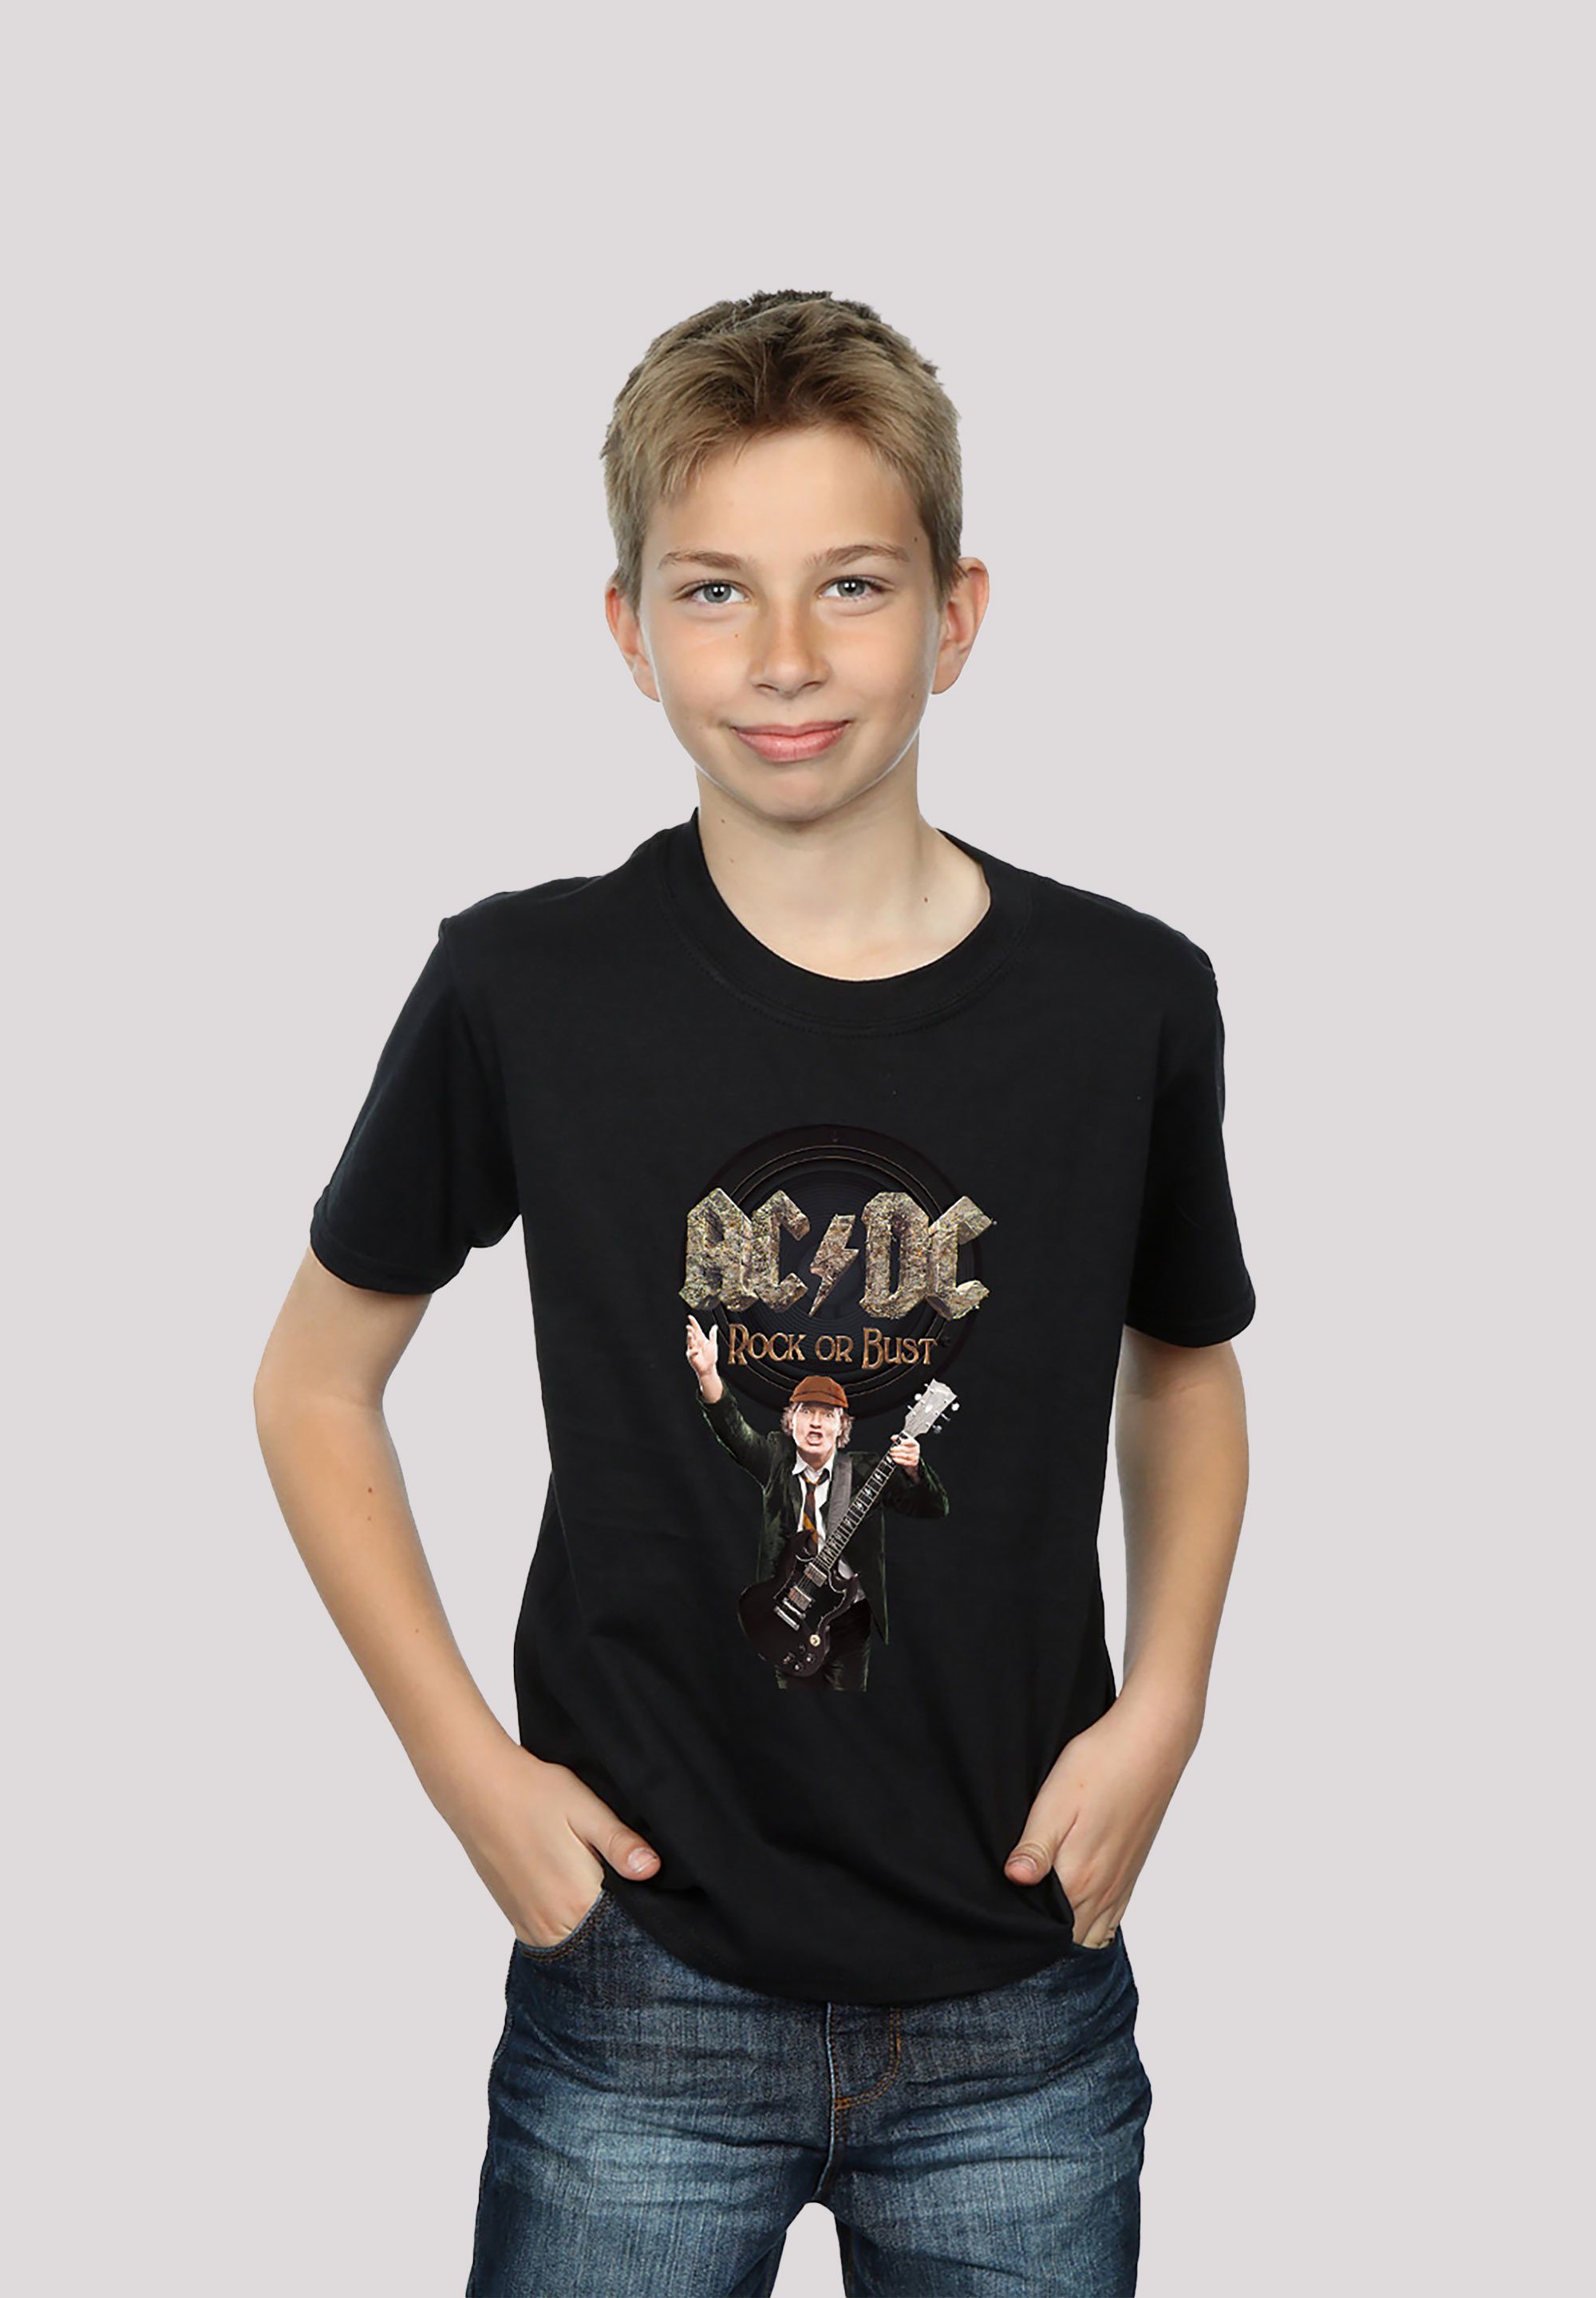 F4NT4STIC T-Shirt ACDC Rock Or Bust Angus Young für Kinder & Herren Print